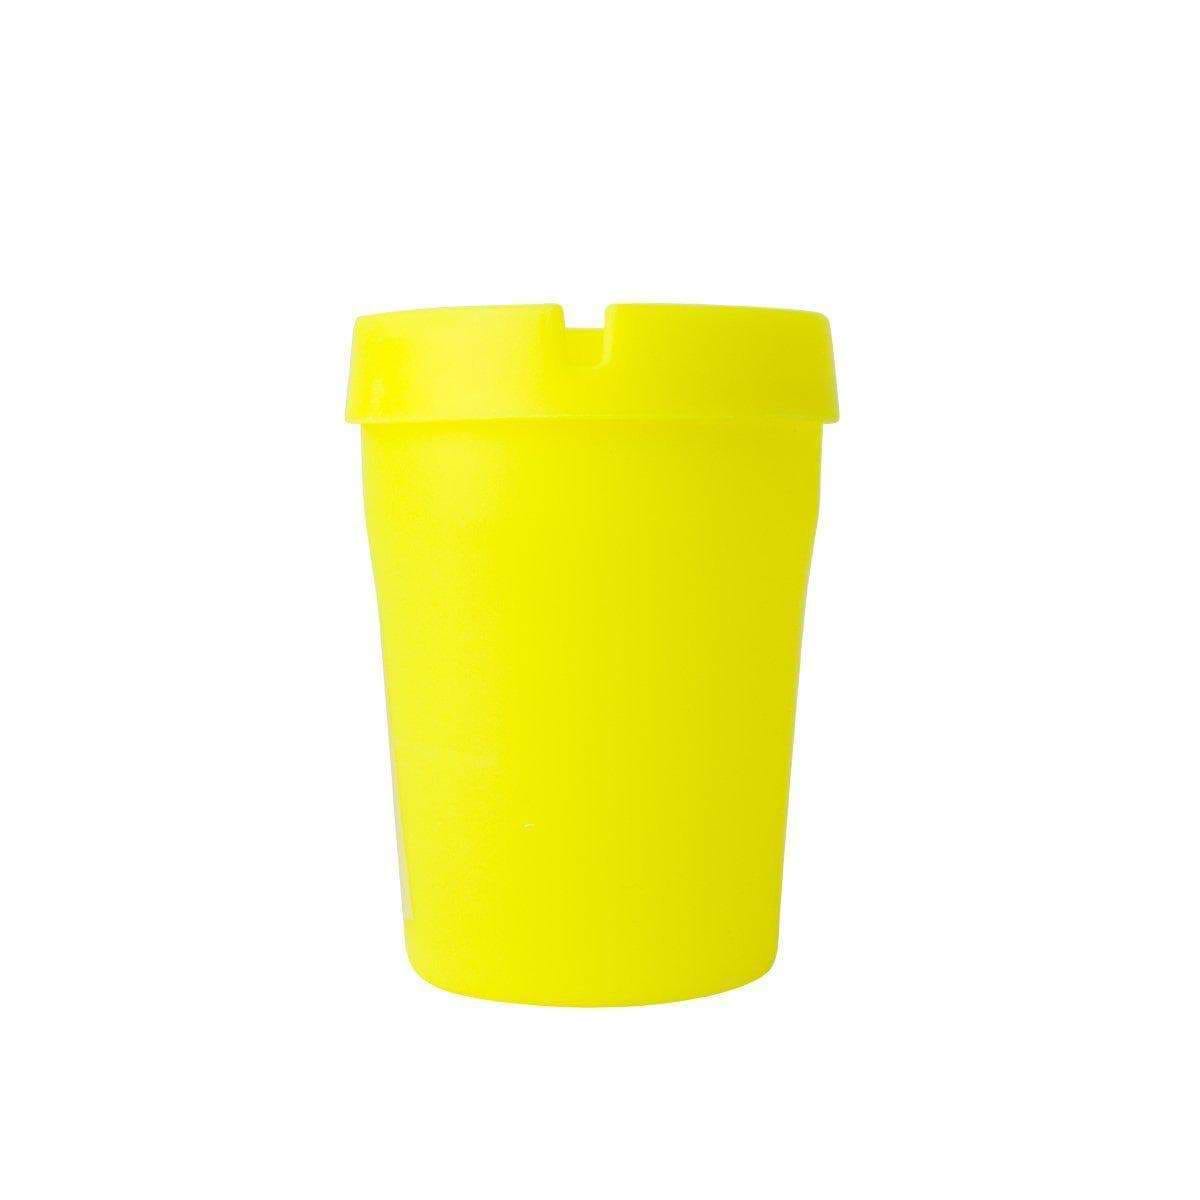 Fun silicone ashtray smoking accessories in yellow color and pail bucket shape design and look